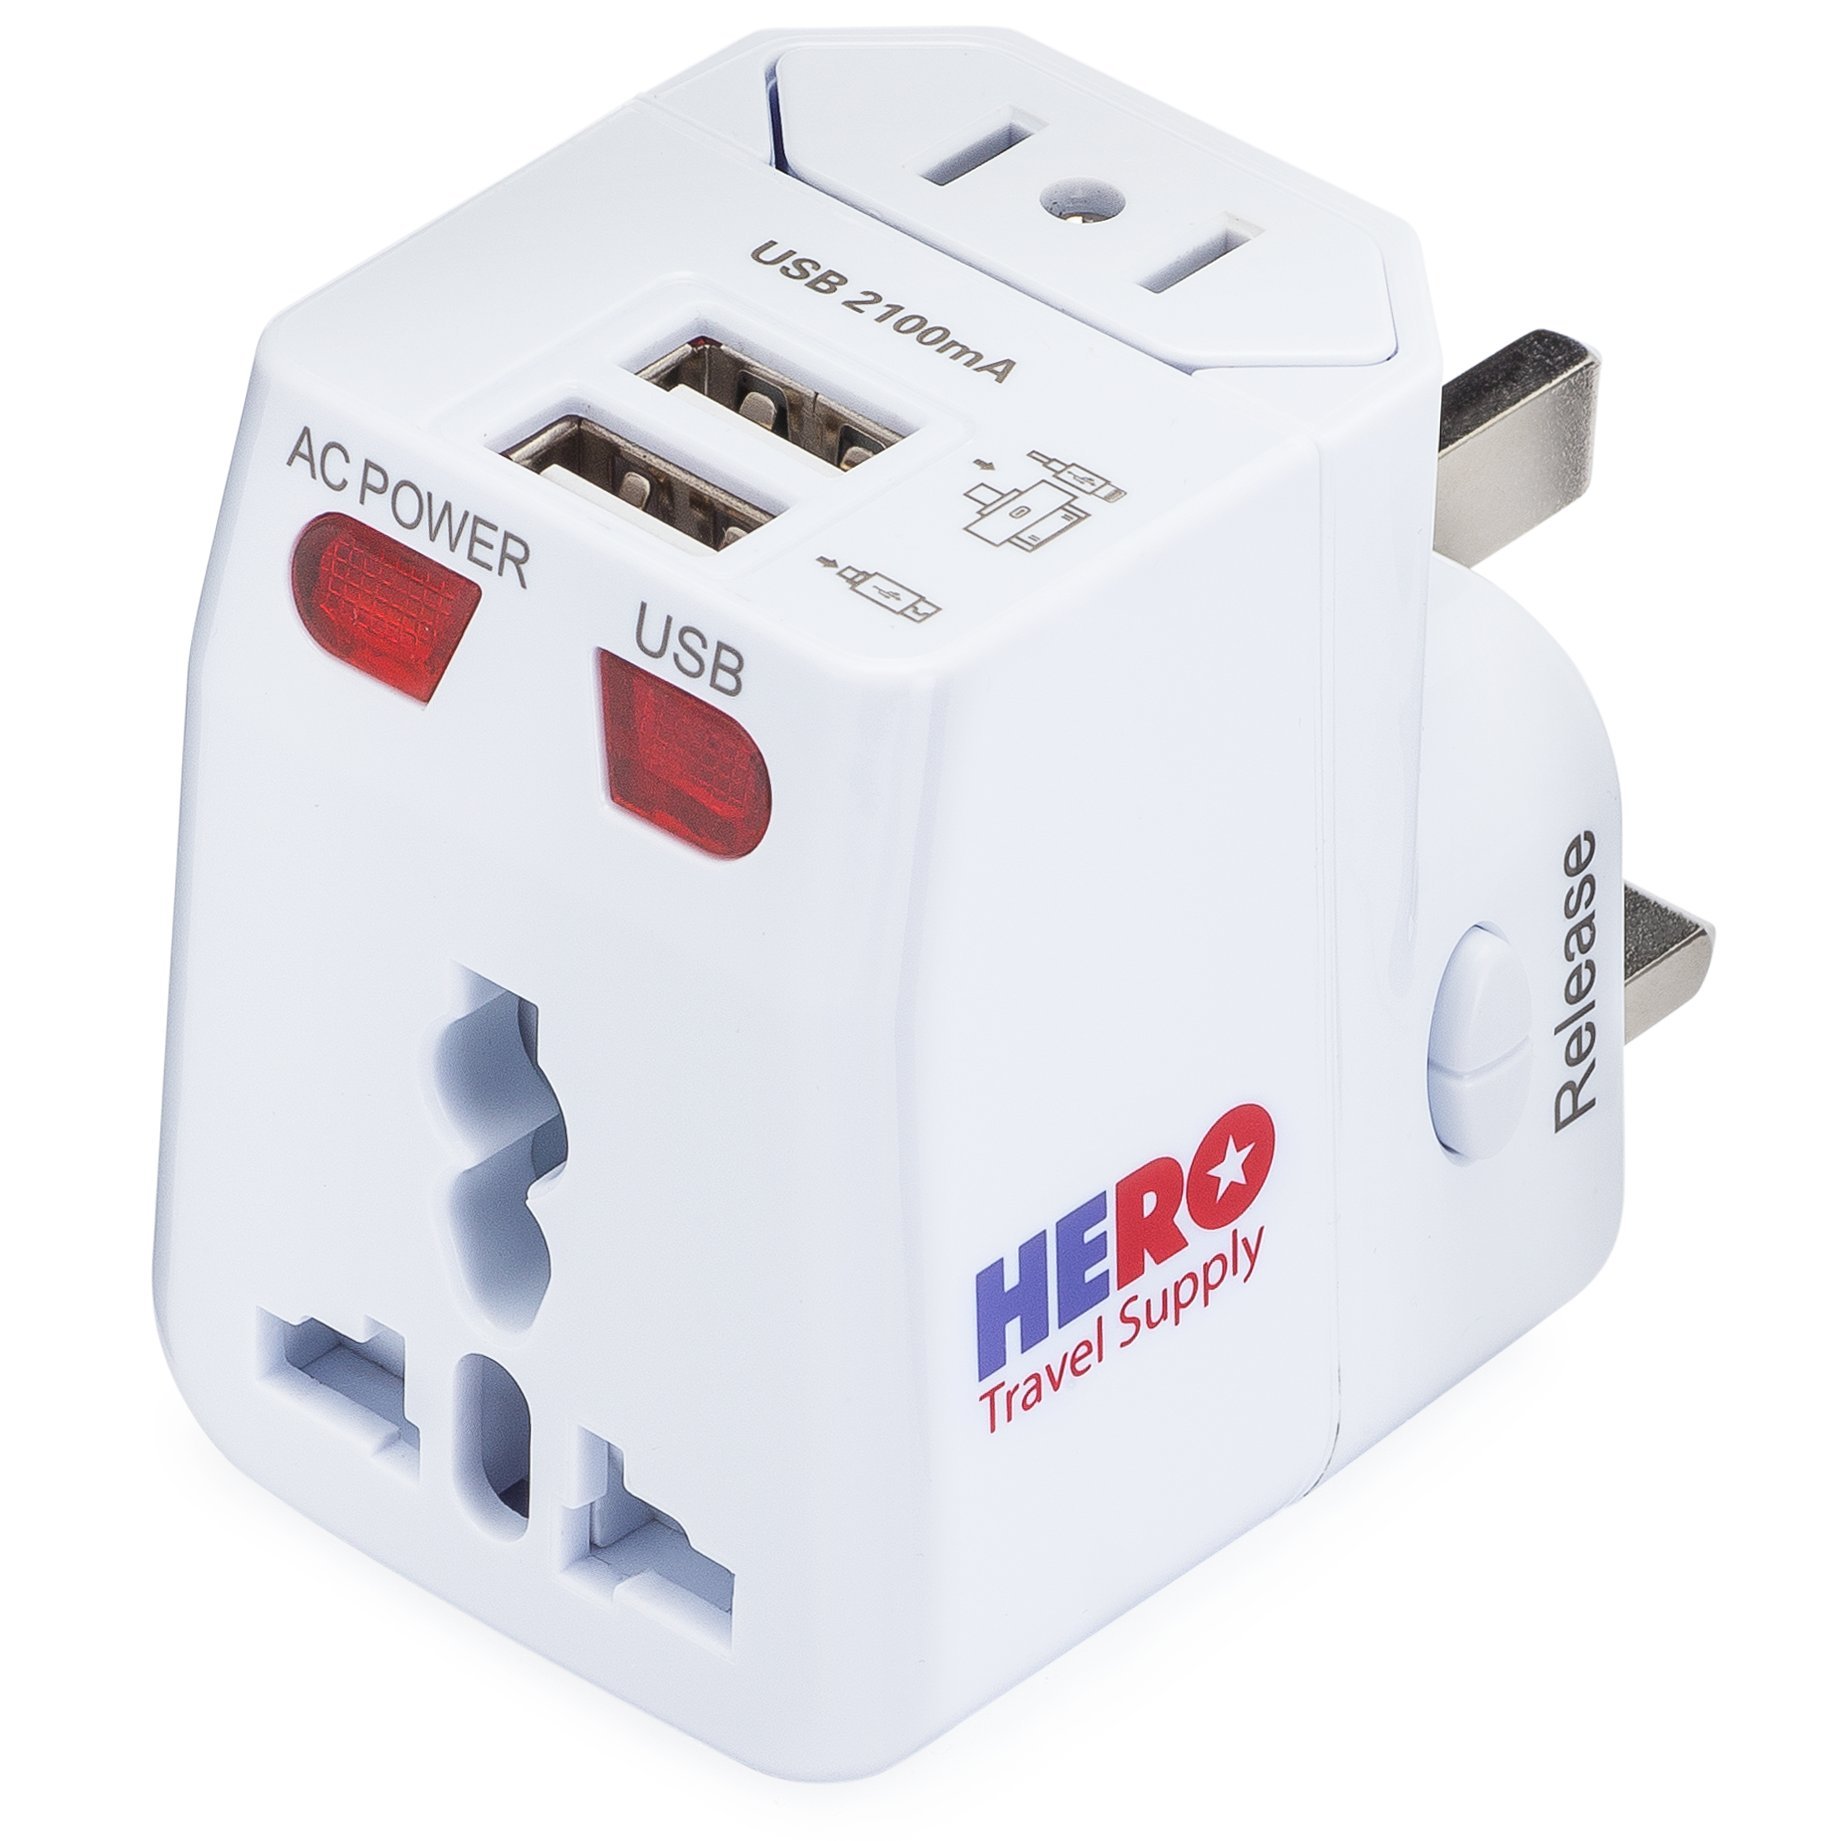 Book Cover Hero Universal Travel Adapter (2 USB Ports) – Power Plug for US Europe France UK Ireland Thailand NZ Australia 100+ Countries Universal Adapter (1 Pack)